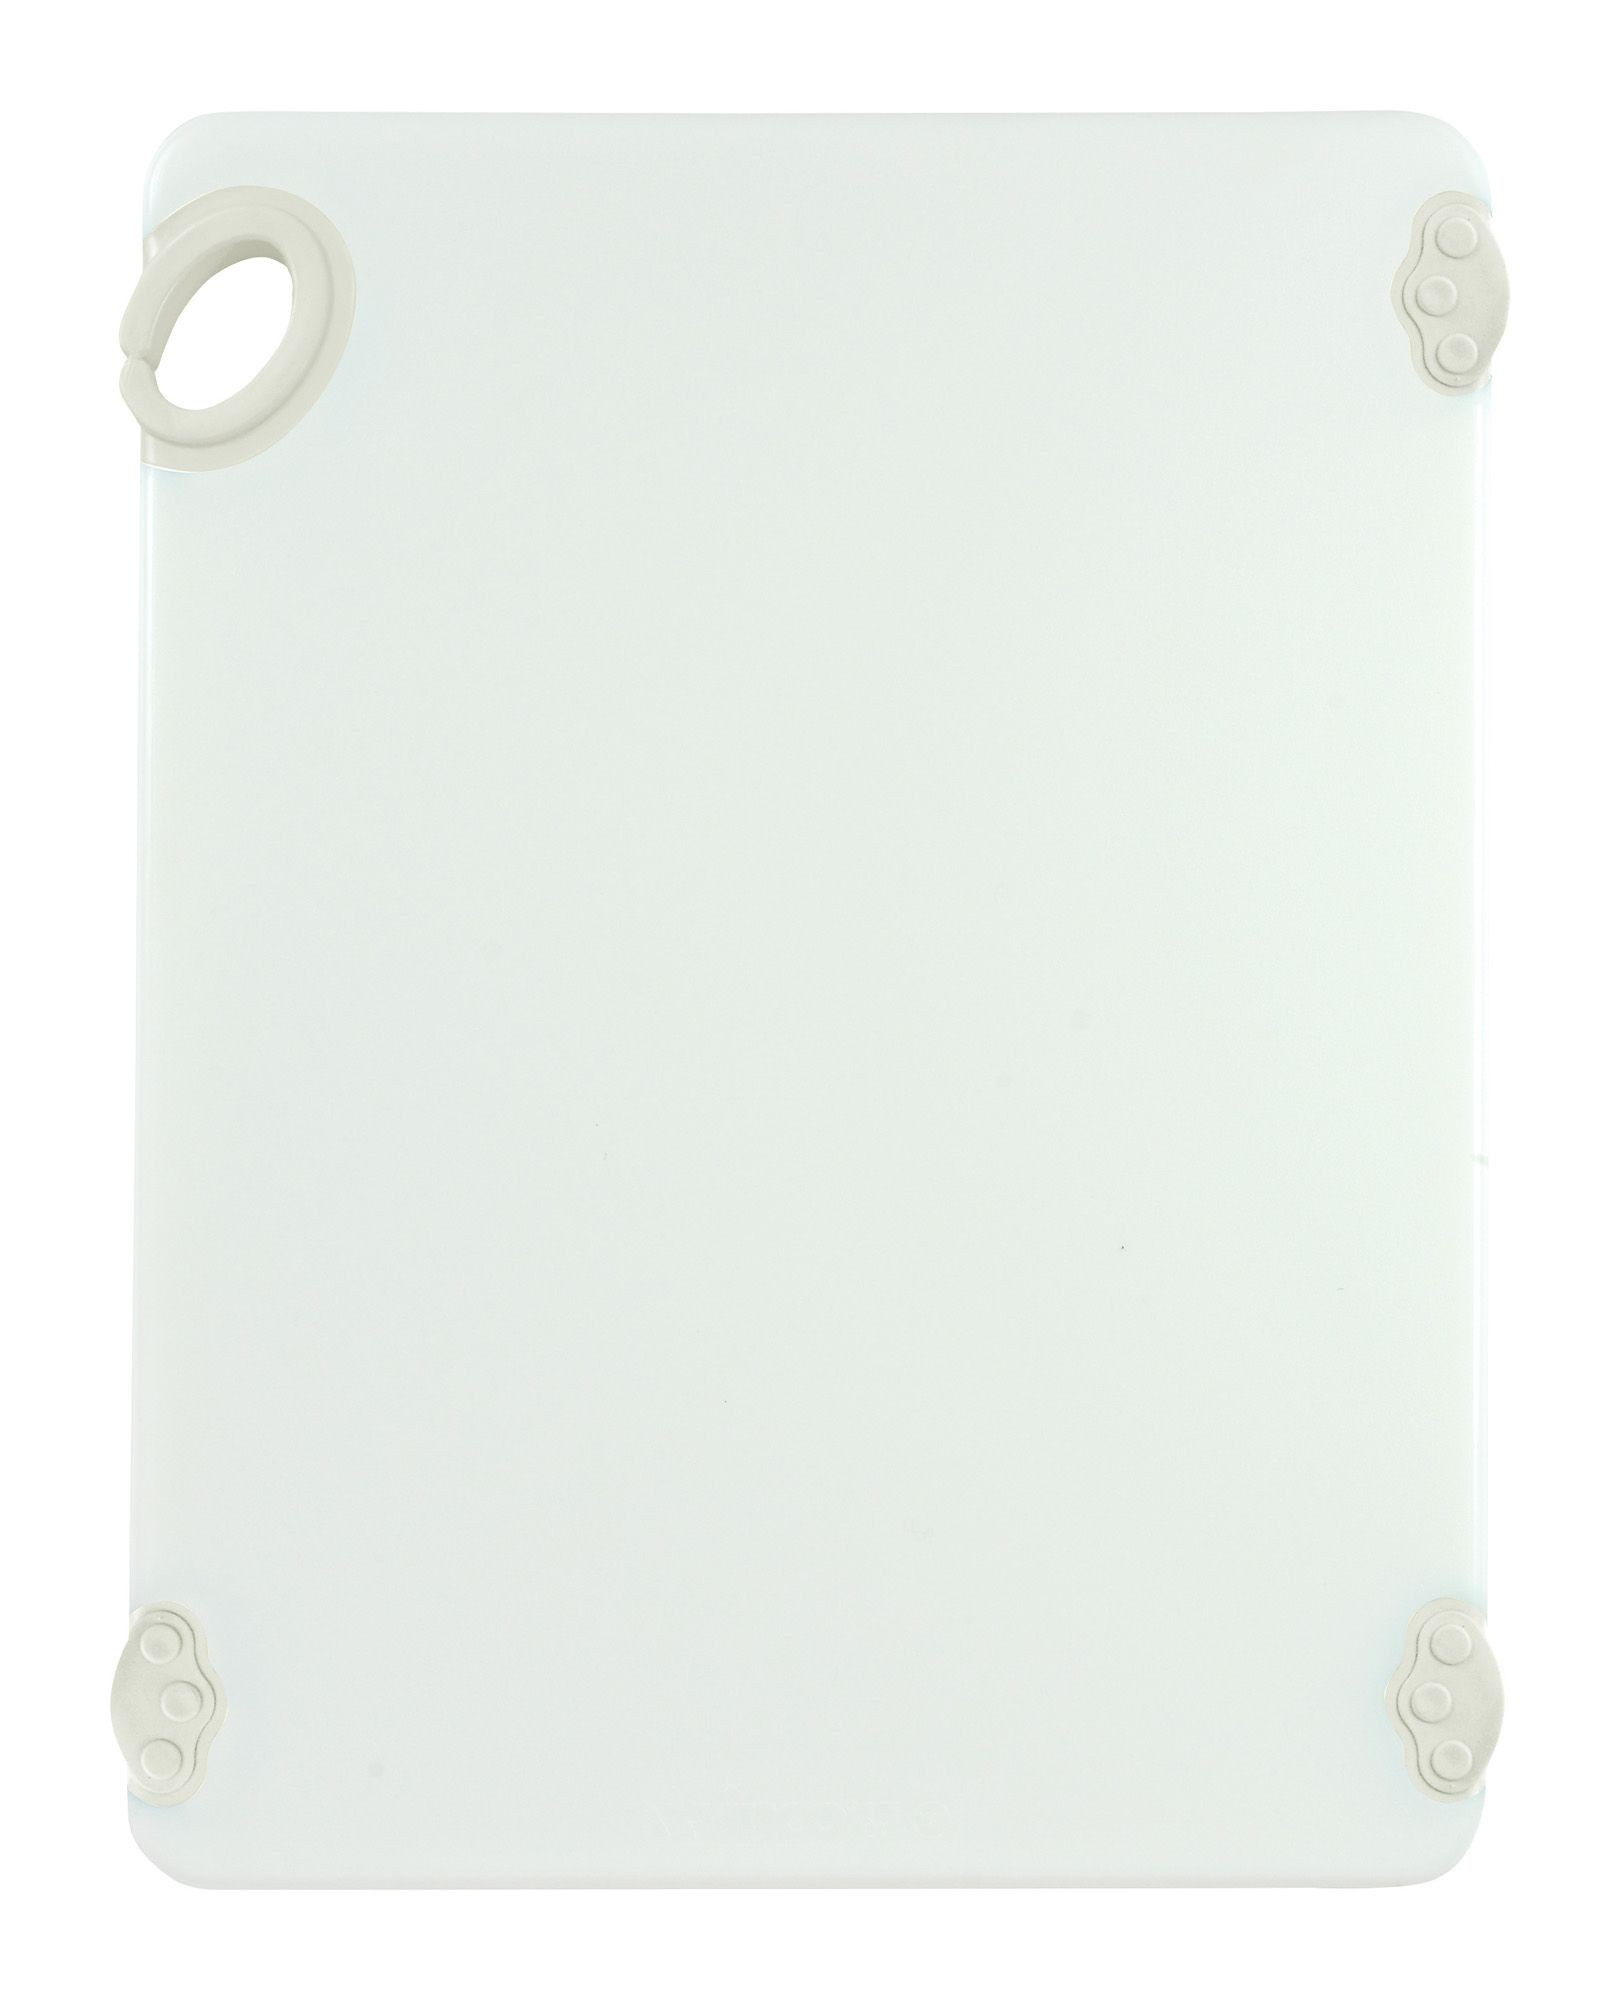 https://www.lionsdeal.com/itempics/Winco-CBN-1520WT-White-StatikBoard-Cutting-Board-with-Hook--15-quot--x-20-quot--x-1-2-quot--37726_xlarge.jpg